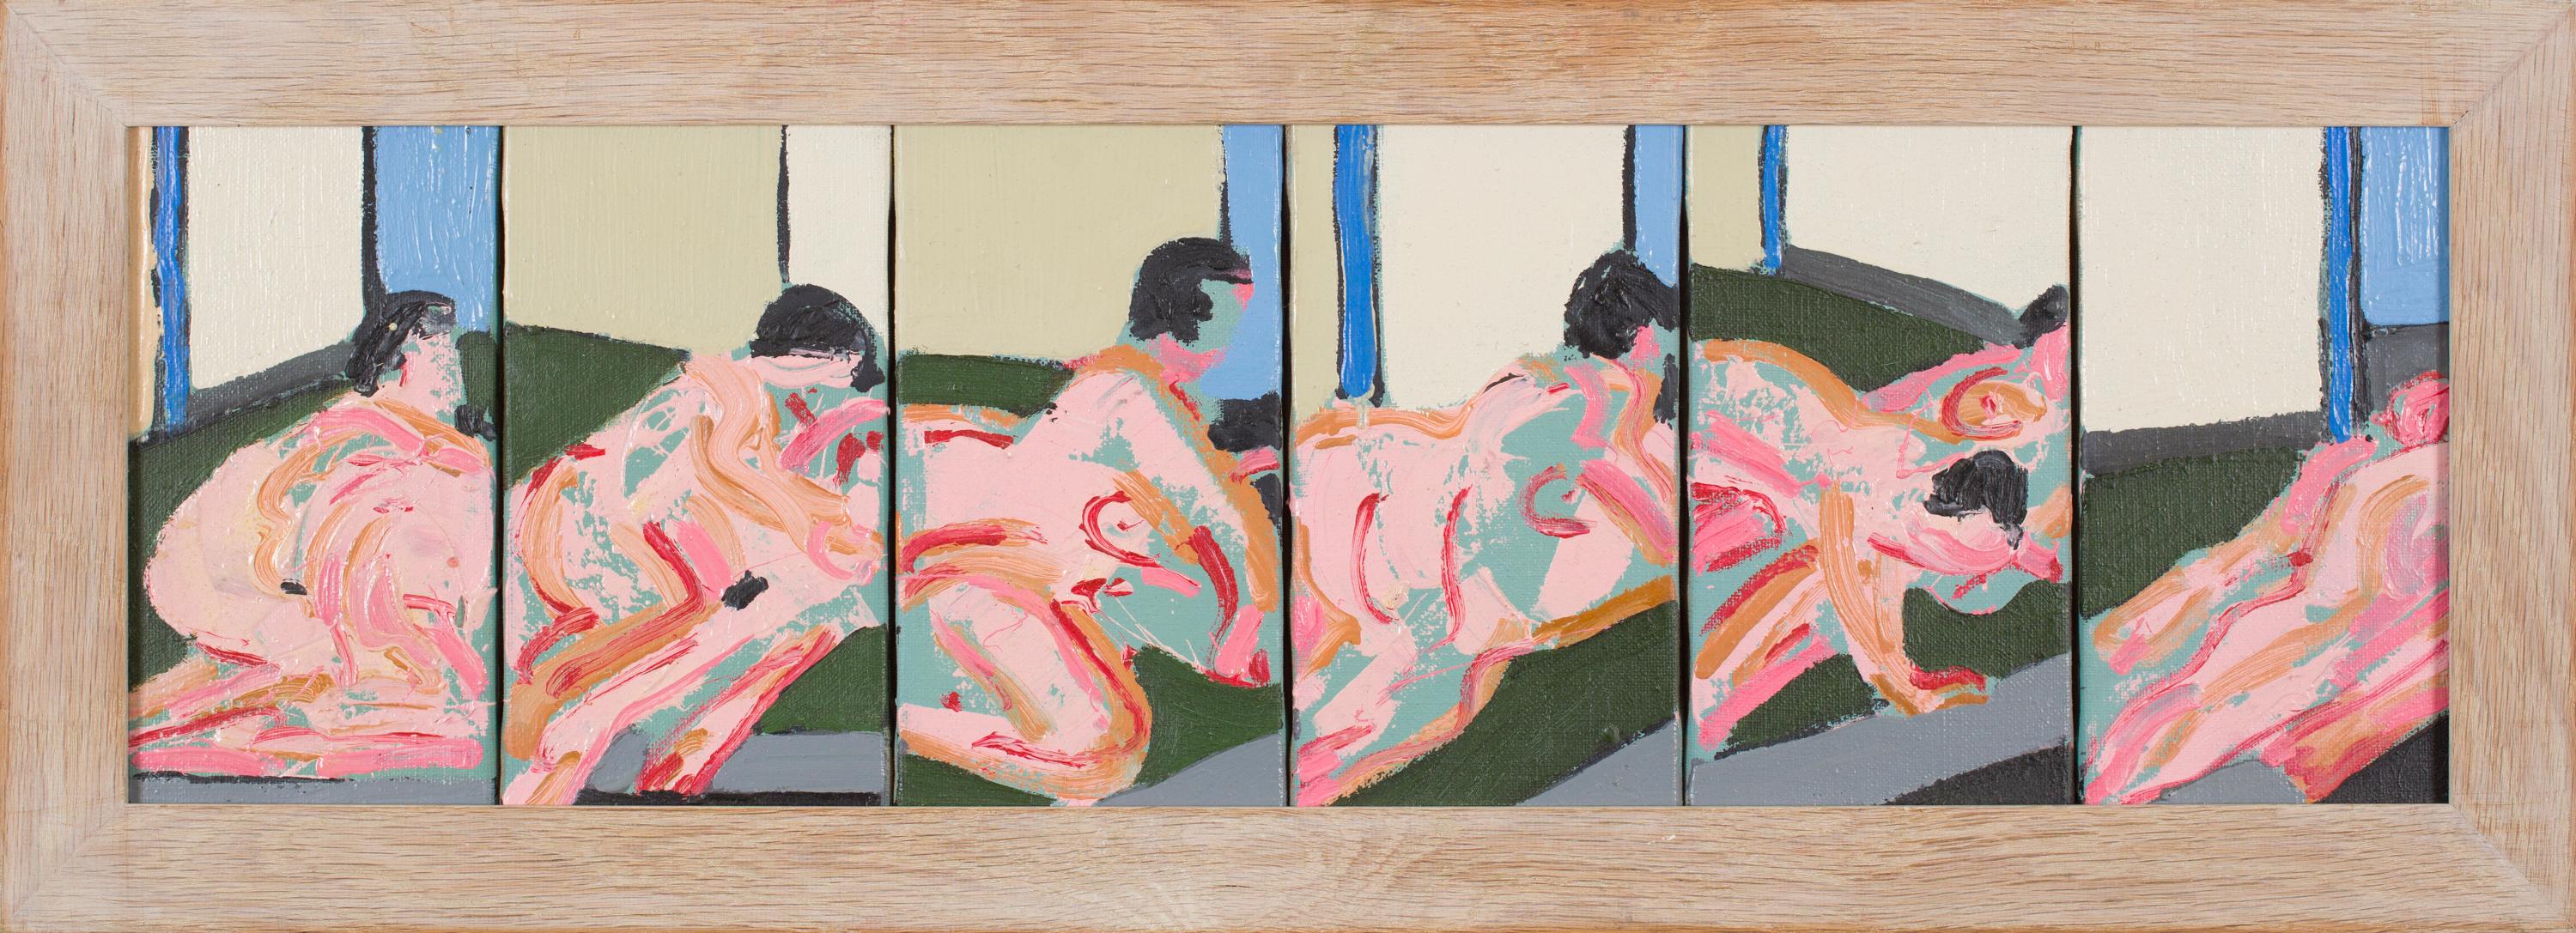 Josquin Pouillon Nude Painting - Little Love Stories IV - Polyptych 